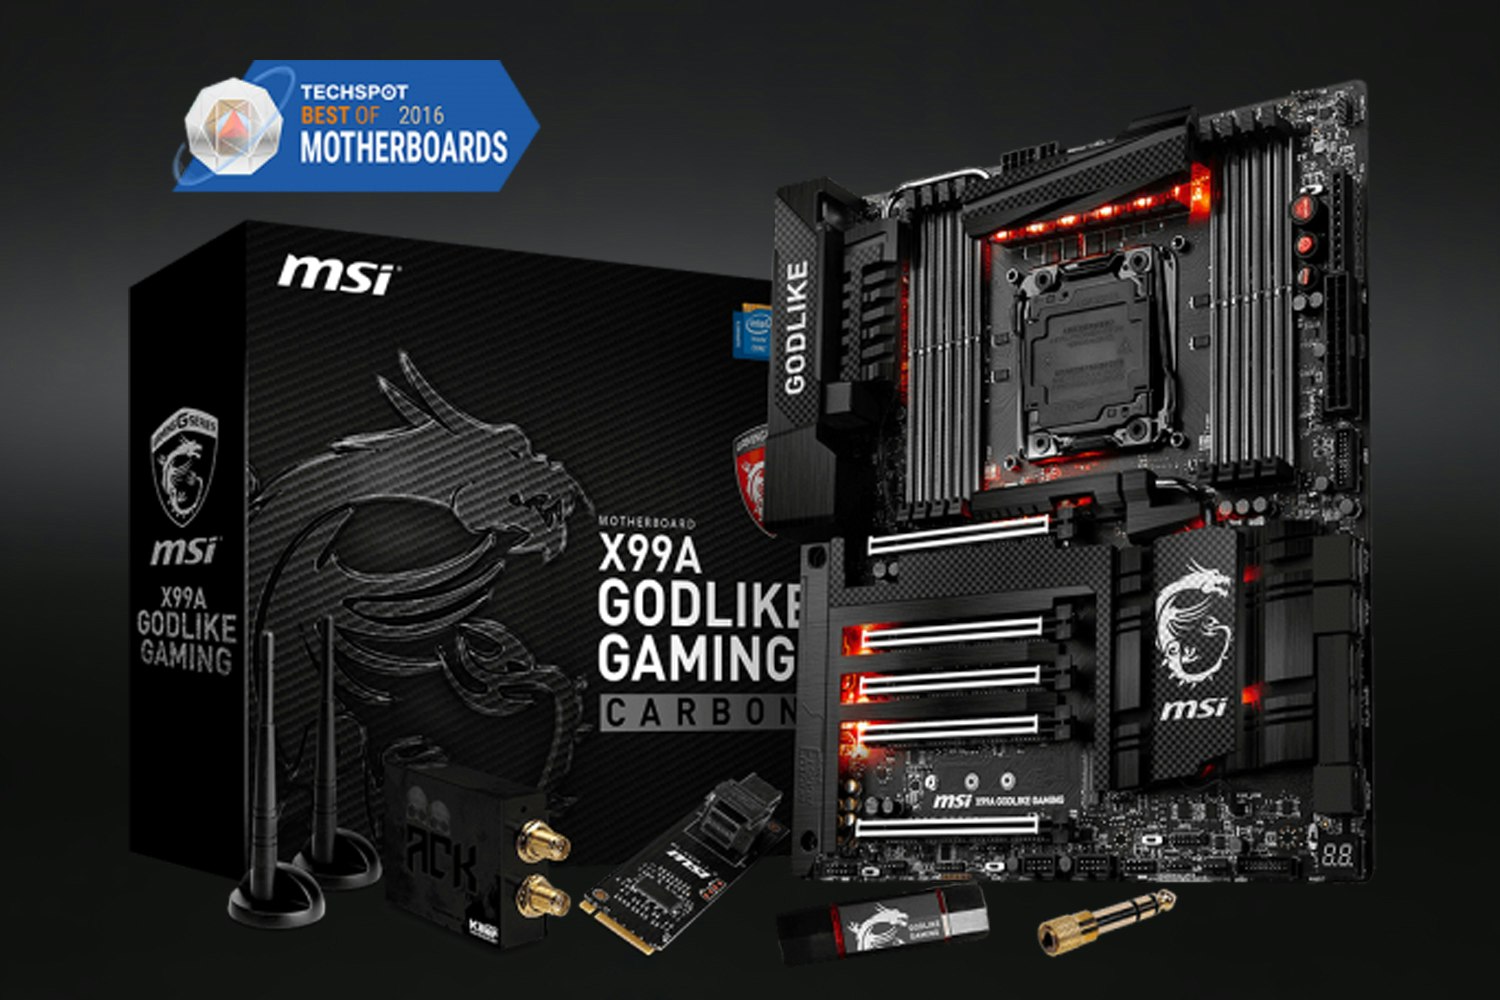 msi super charger